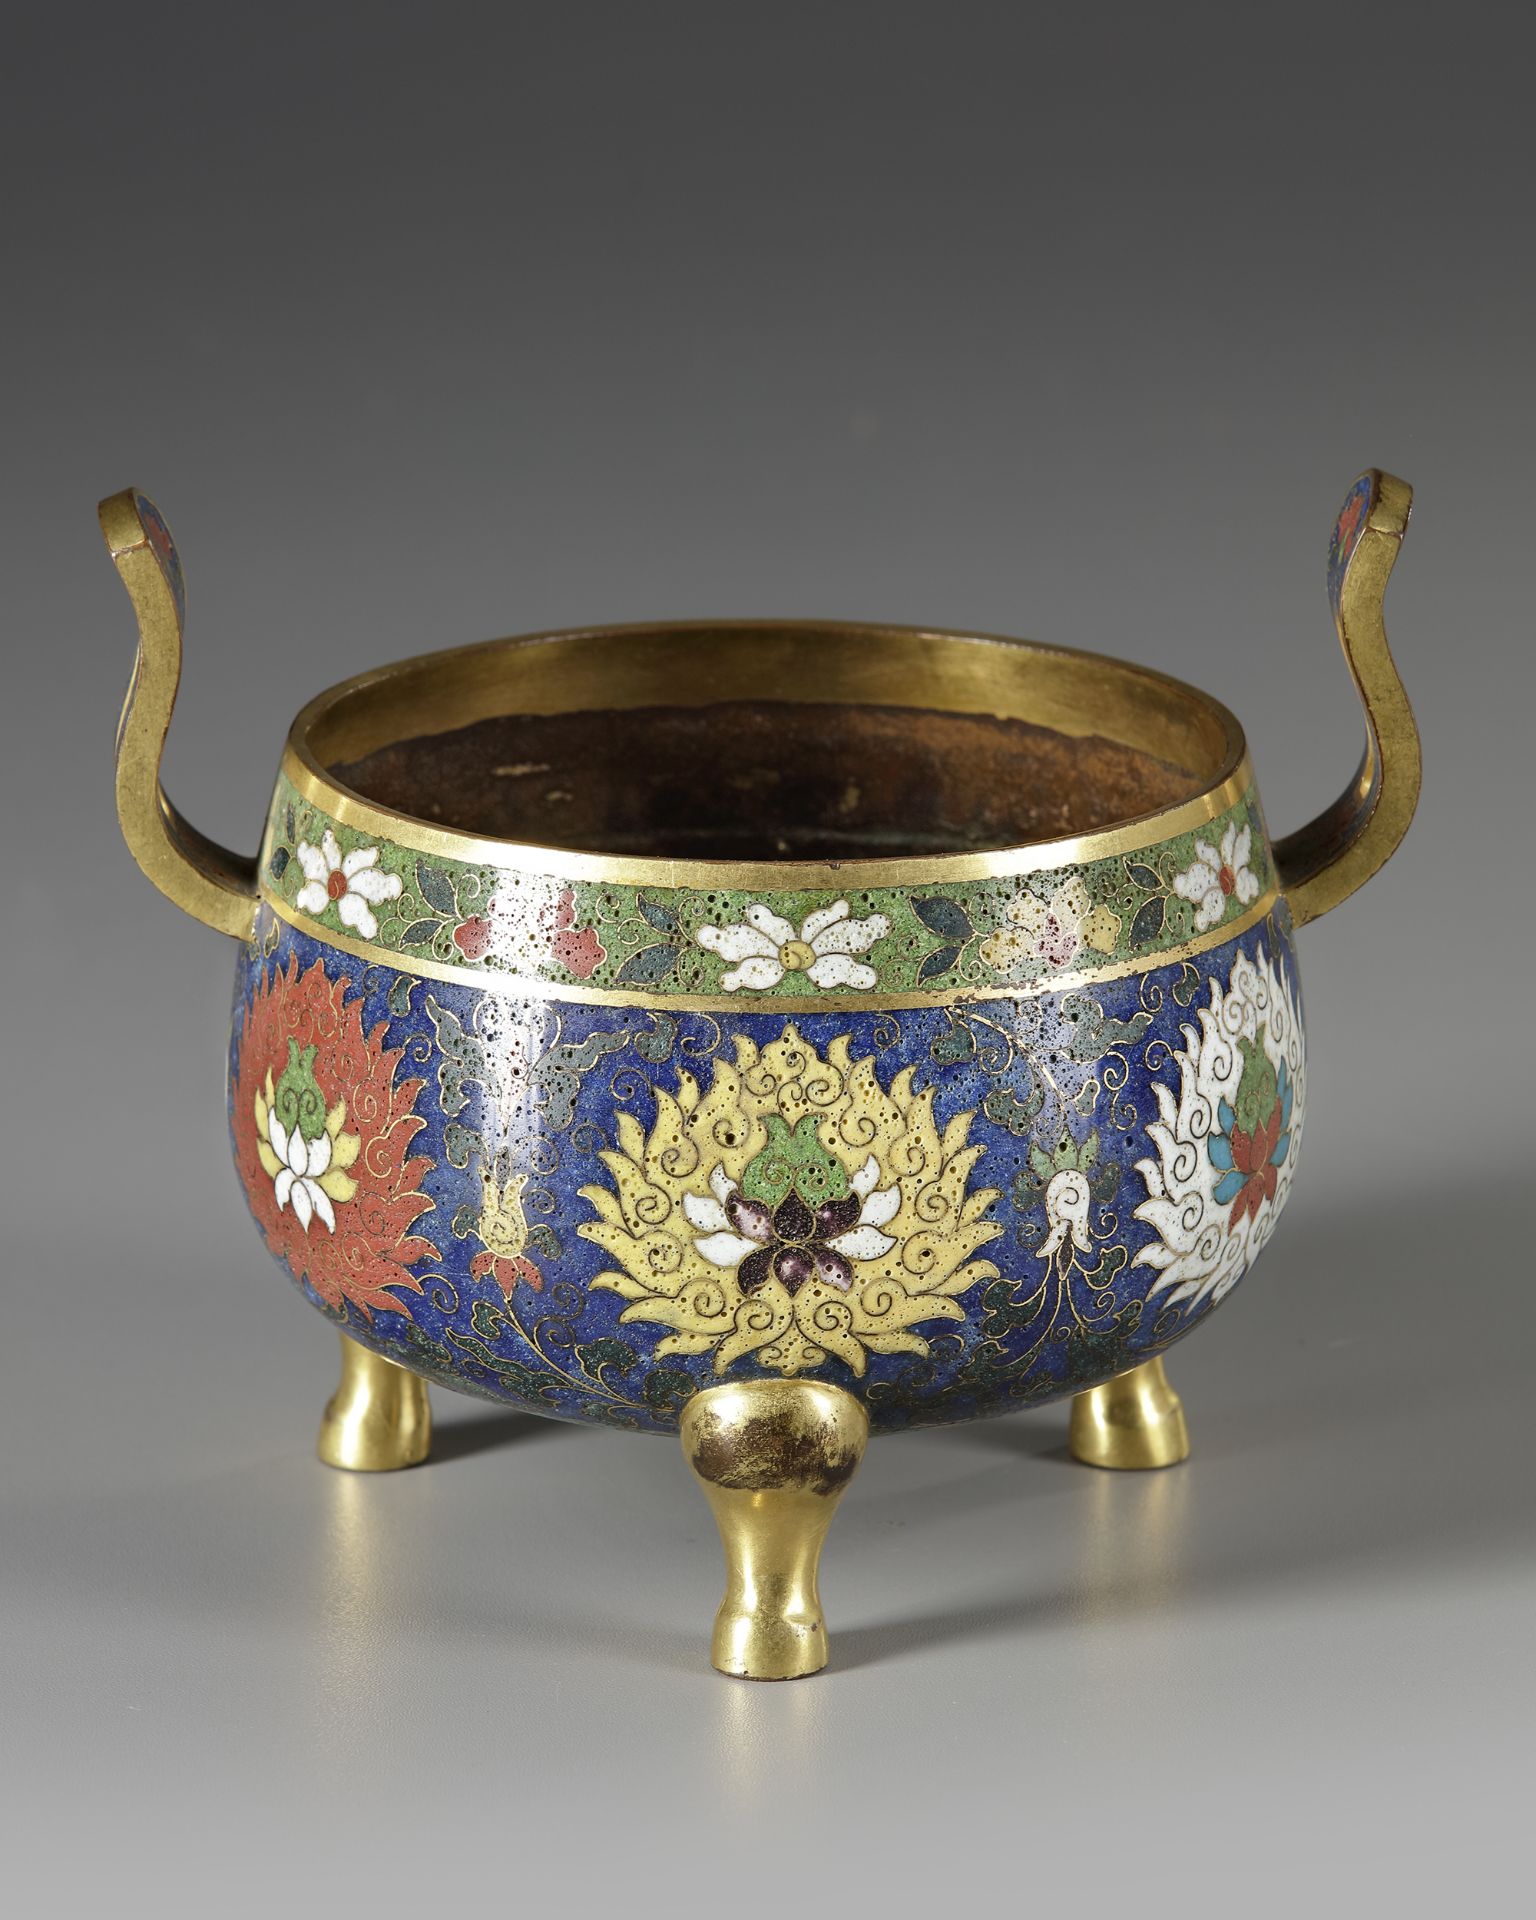 A CHINESE CLOISONNE ENAMEL TRIPOD CENCER, MING DYNASTY (1368-1644) OR LATER - Image 3 of 5